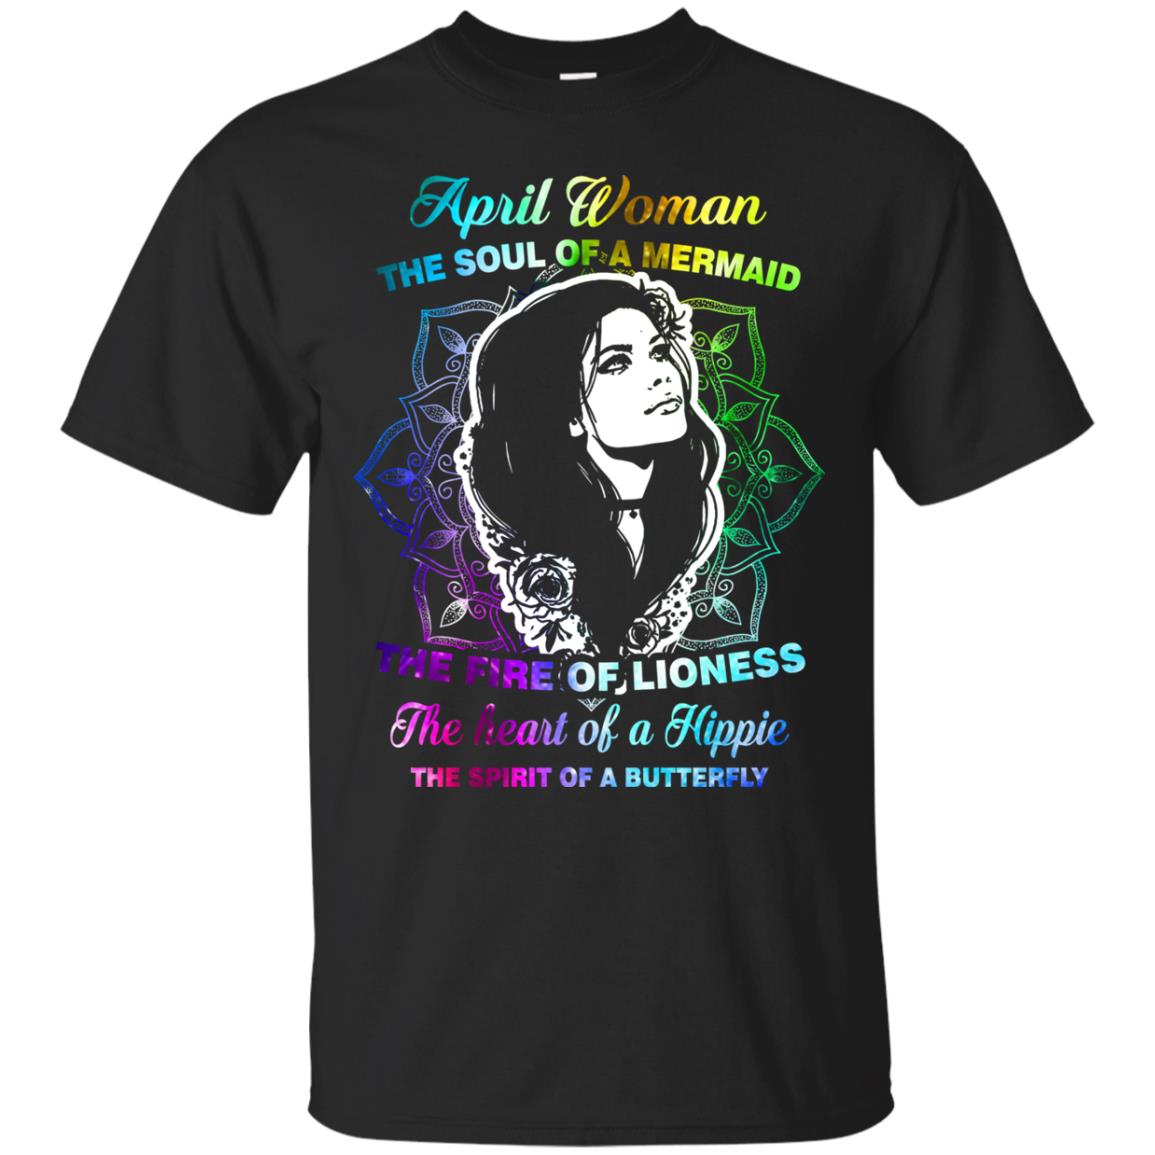 April Woman Shirt The Soul Of A Mermaid The Fire Of Lioness The Heart Of A Hippeie The Spirit Of A ButterflyG200 Gildan Ultra Cotton T-Shirt